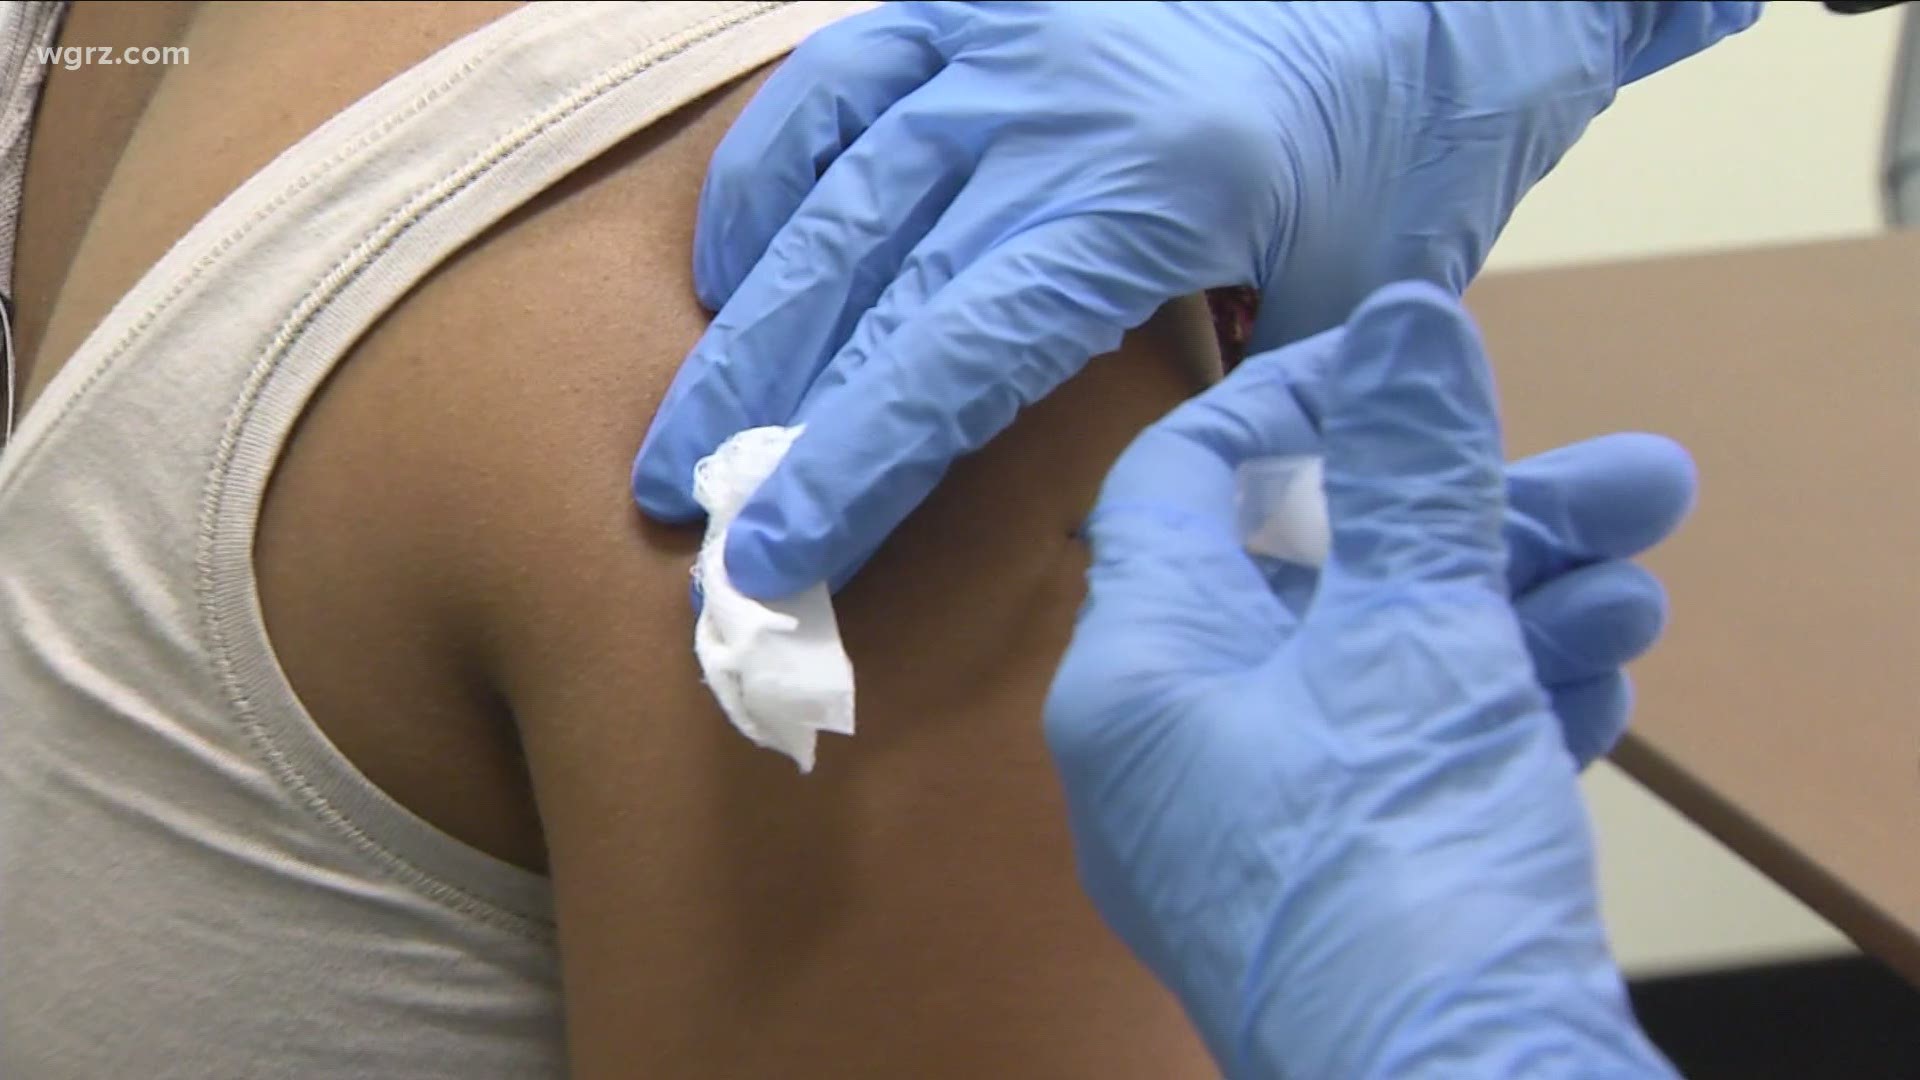 county is announcing that as of last week some 75 thousand Erie County residents have received their first round of vaccinations